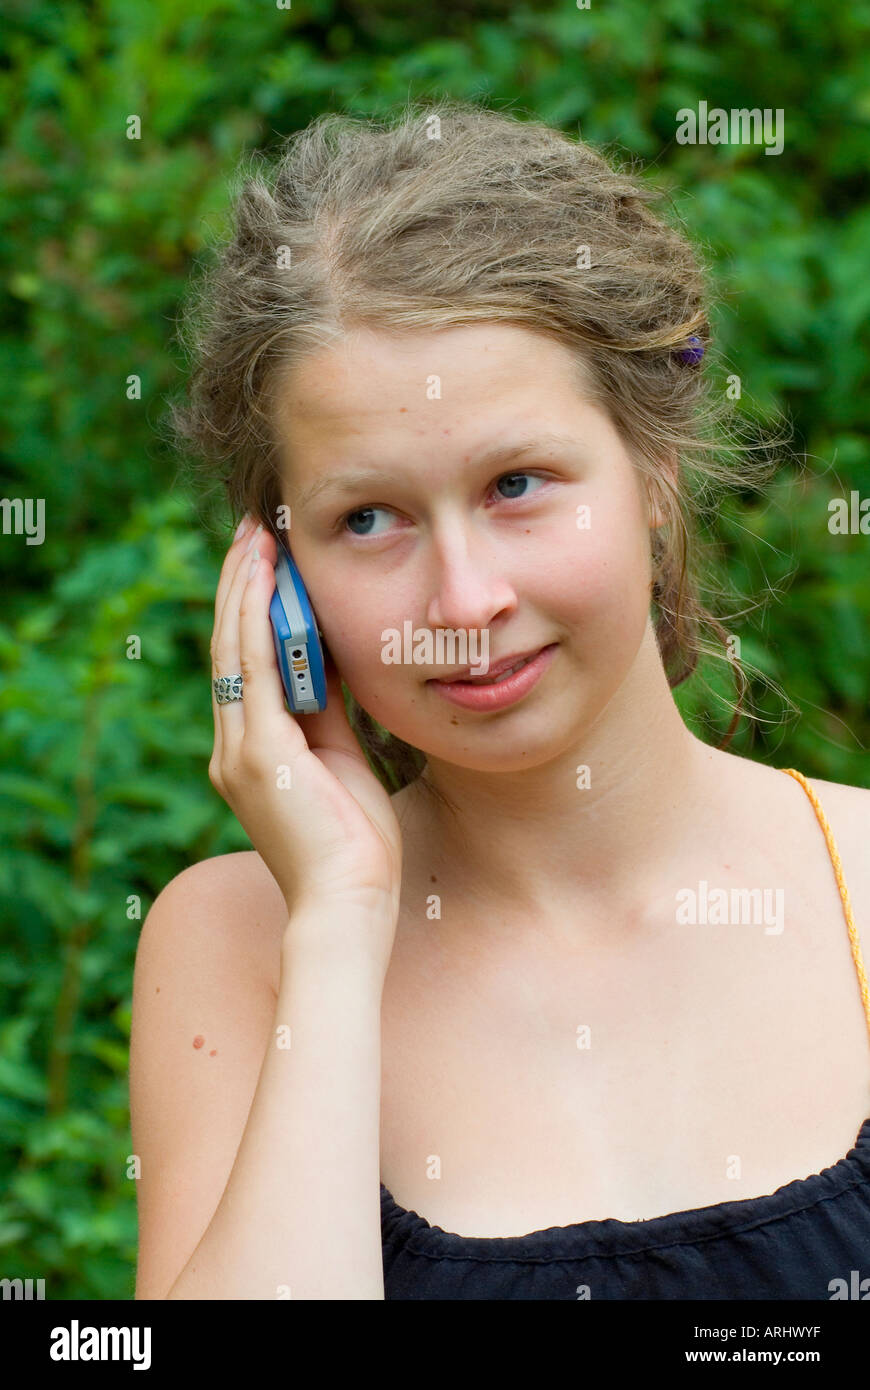 young woman girl making a phone call calling with a mobile phone facial expression is sceptical Stock Photo